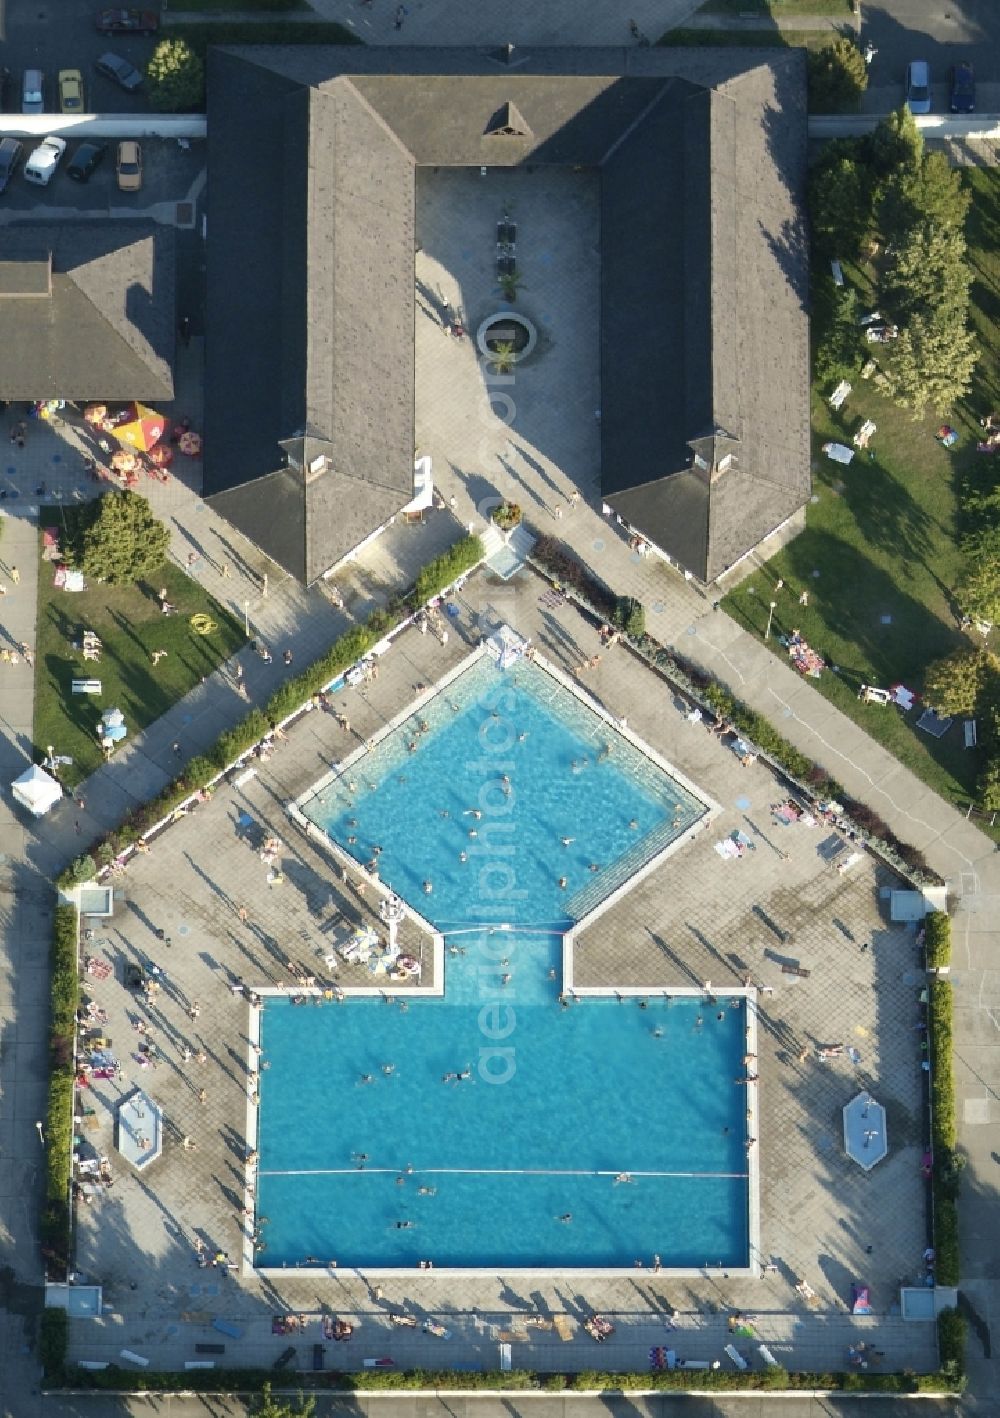 Vertical aerial photograph Budapest - Vertical aerial view from the satellite perspective of the spa and swimming pools at the swimming pool of the leisure facility Paskal Spa in Budapest in Hungary